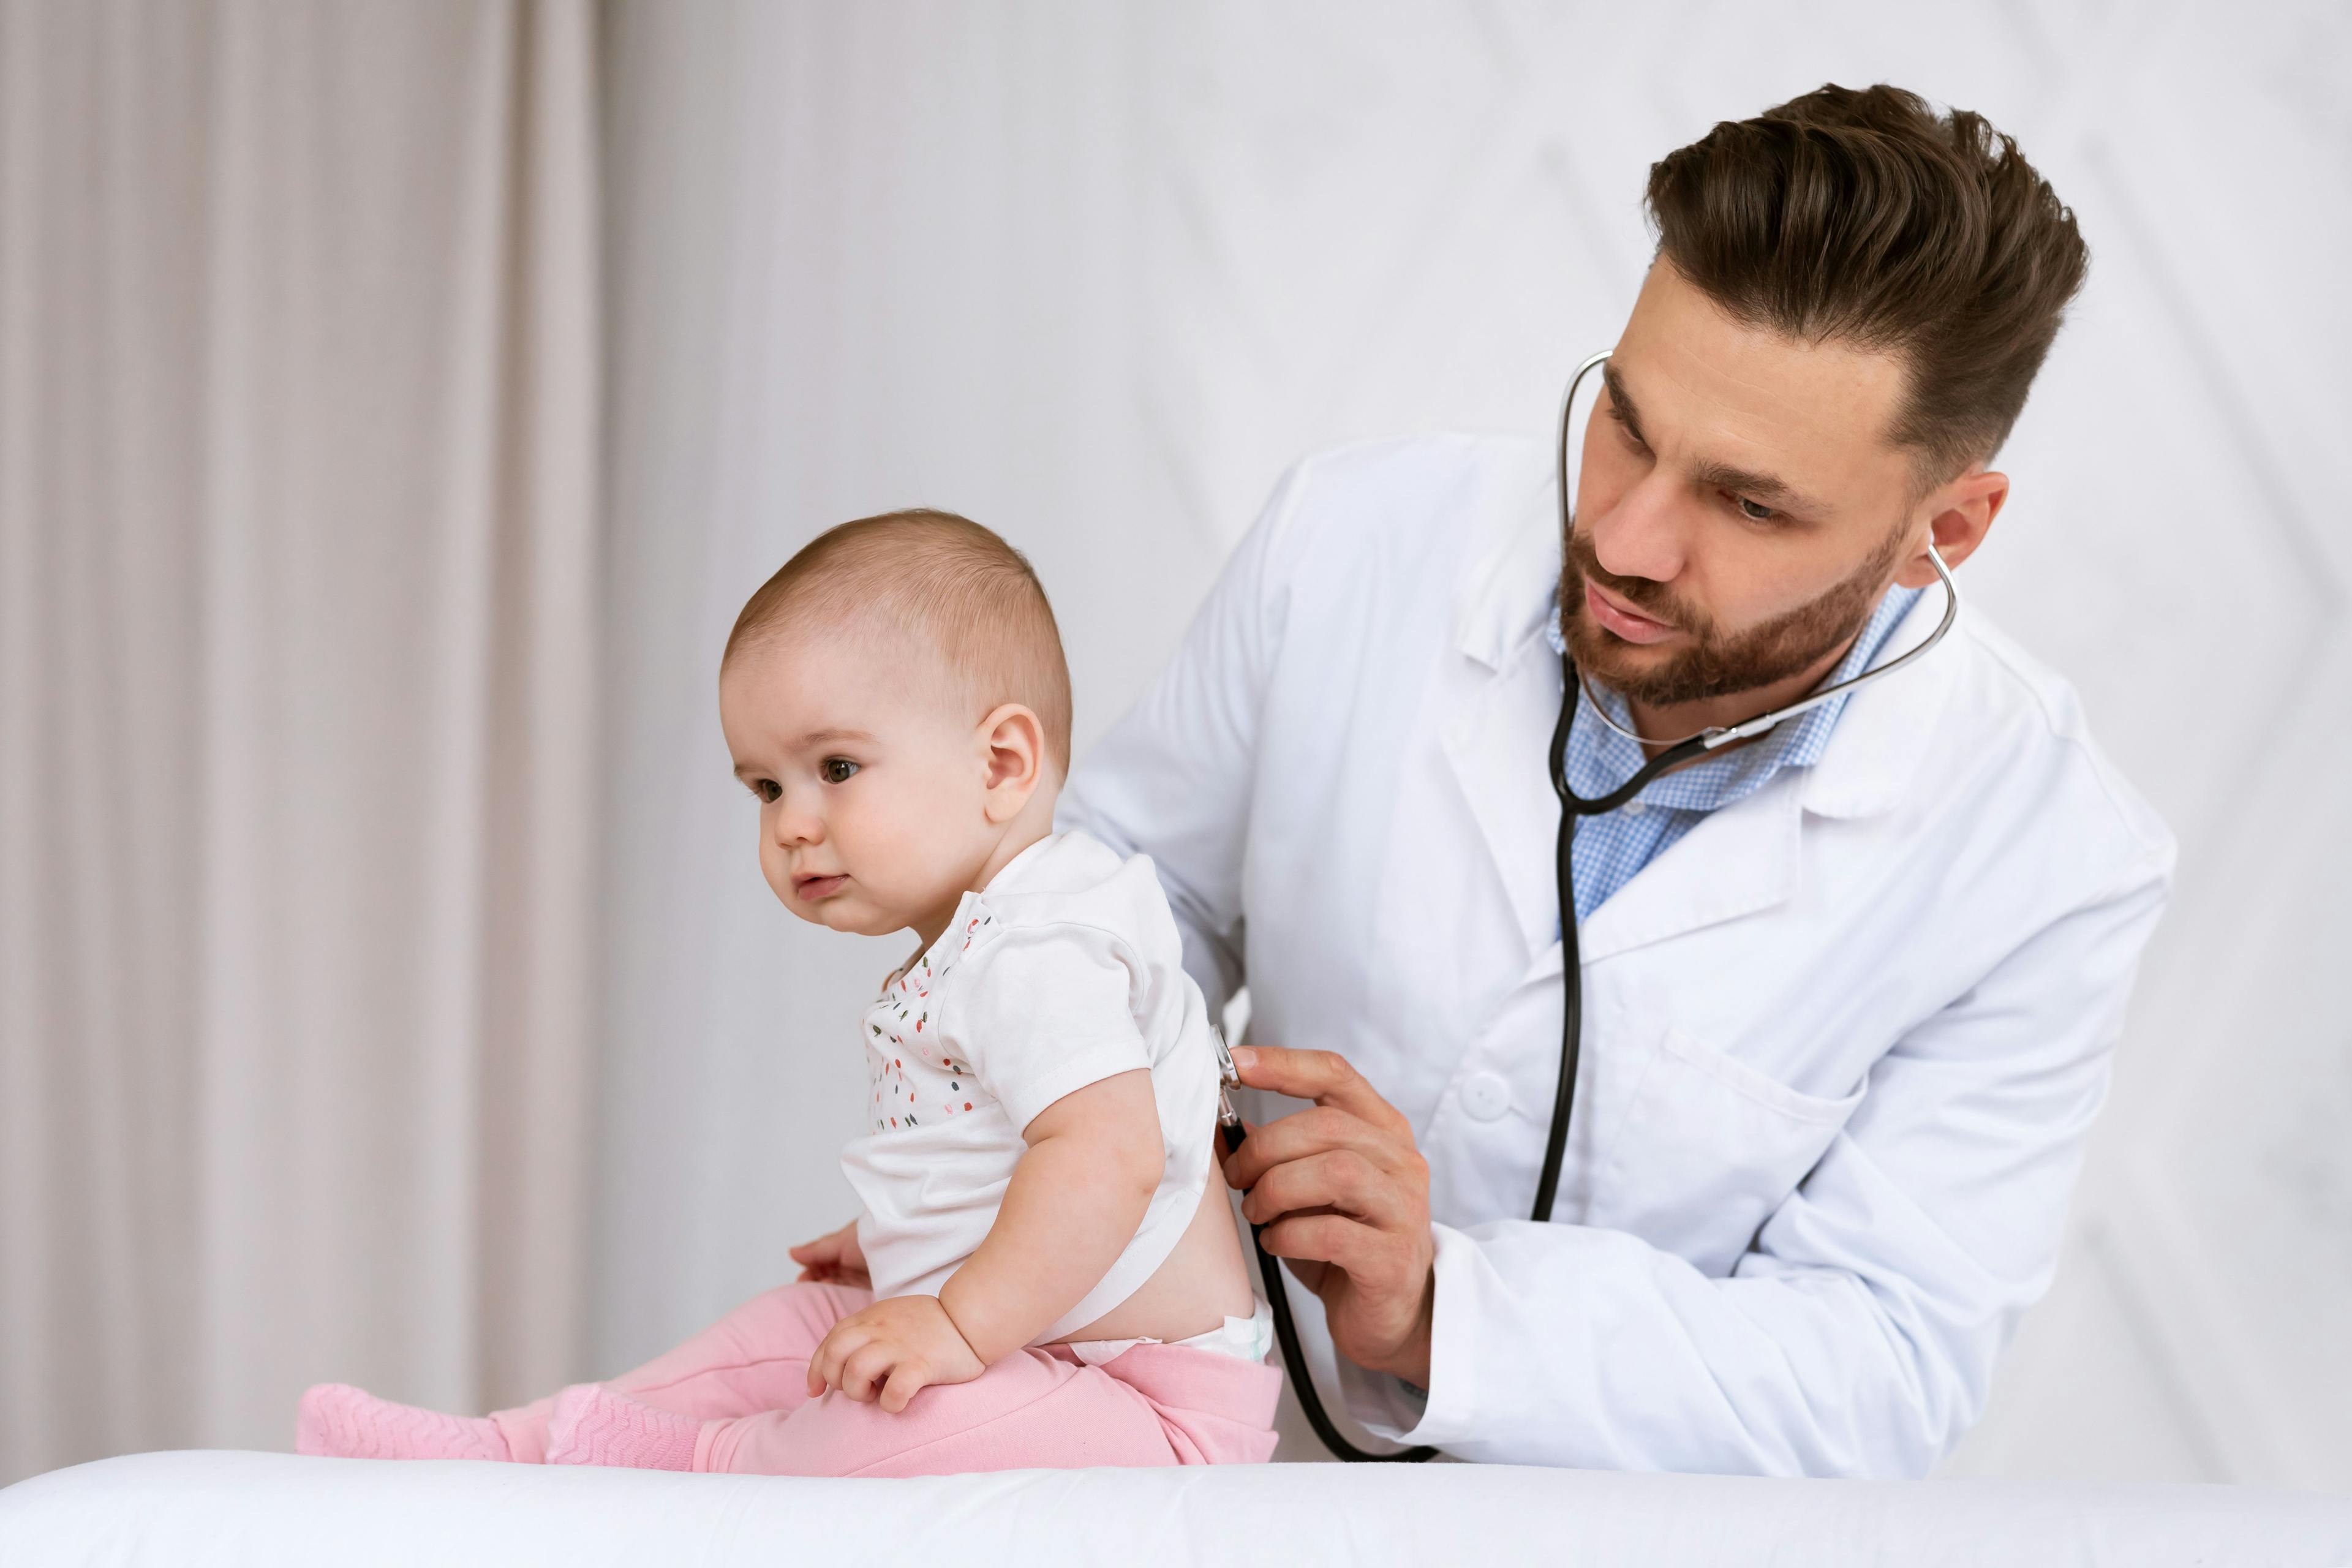 Doctor Examining Toddler Listening To Lungs With Stethoscope In Clinic | Image credit: Prostock-studio - stock.adobe.com